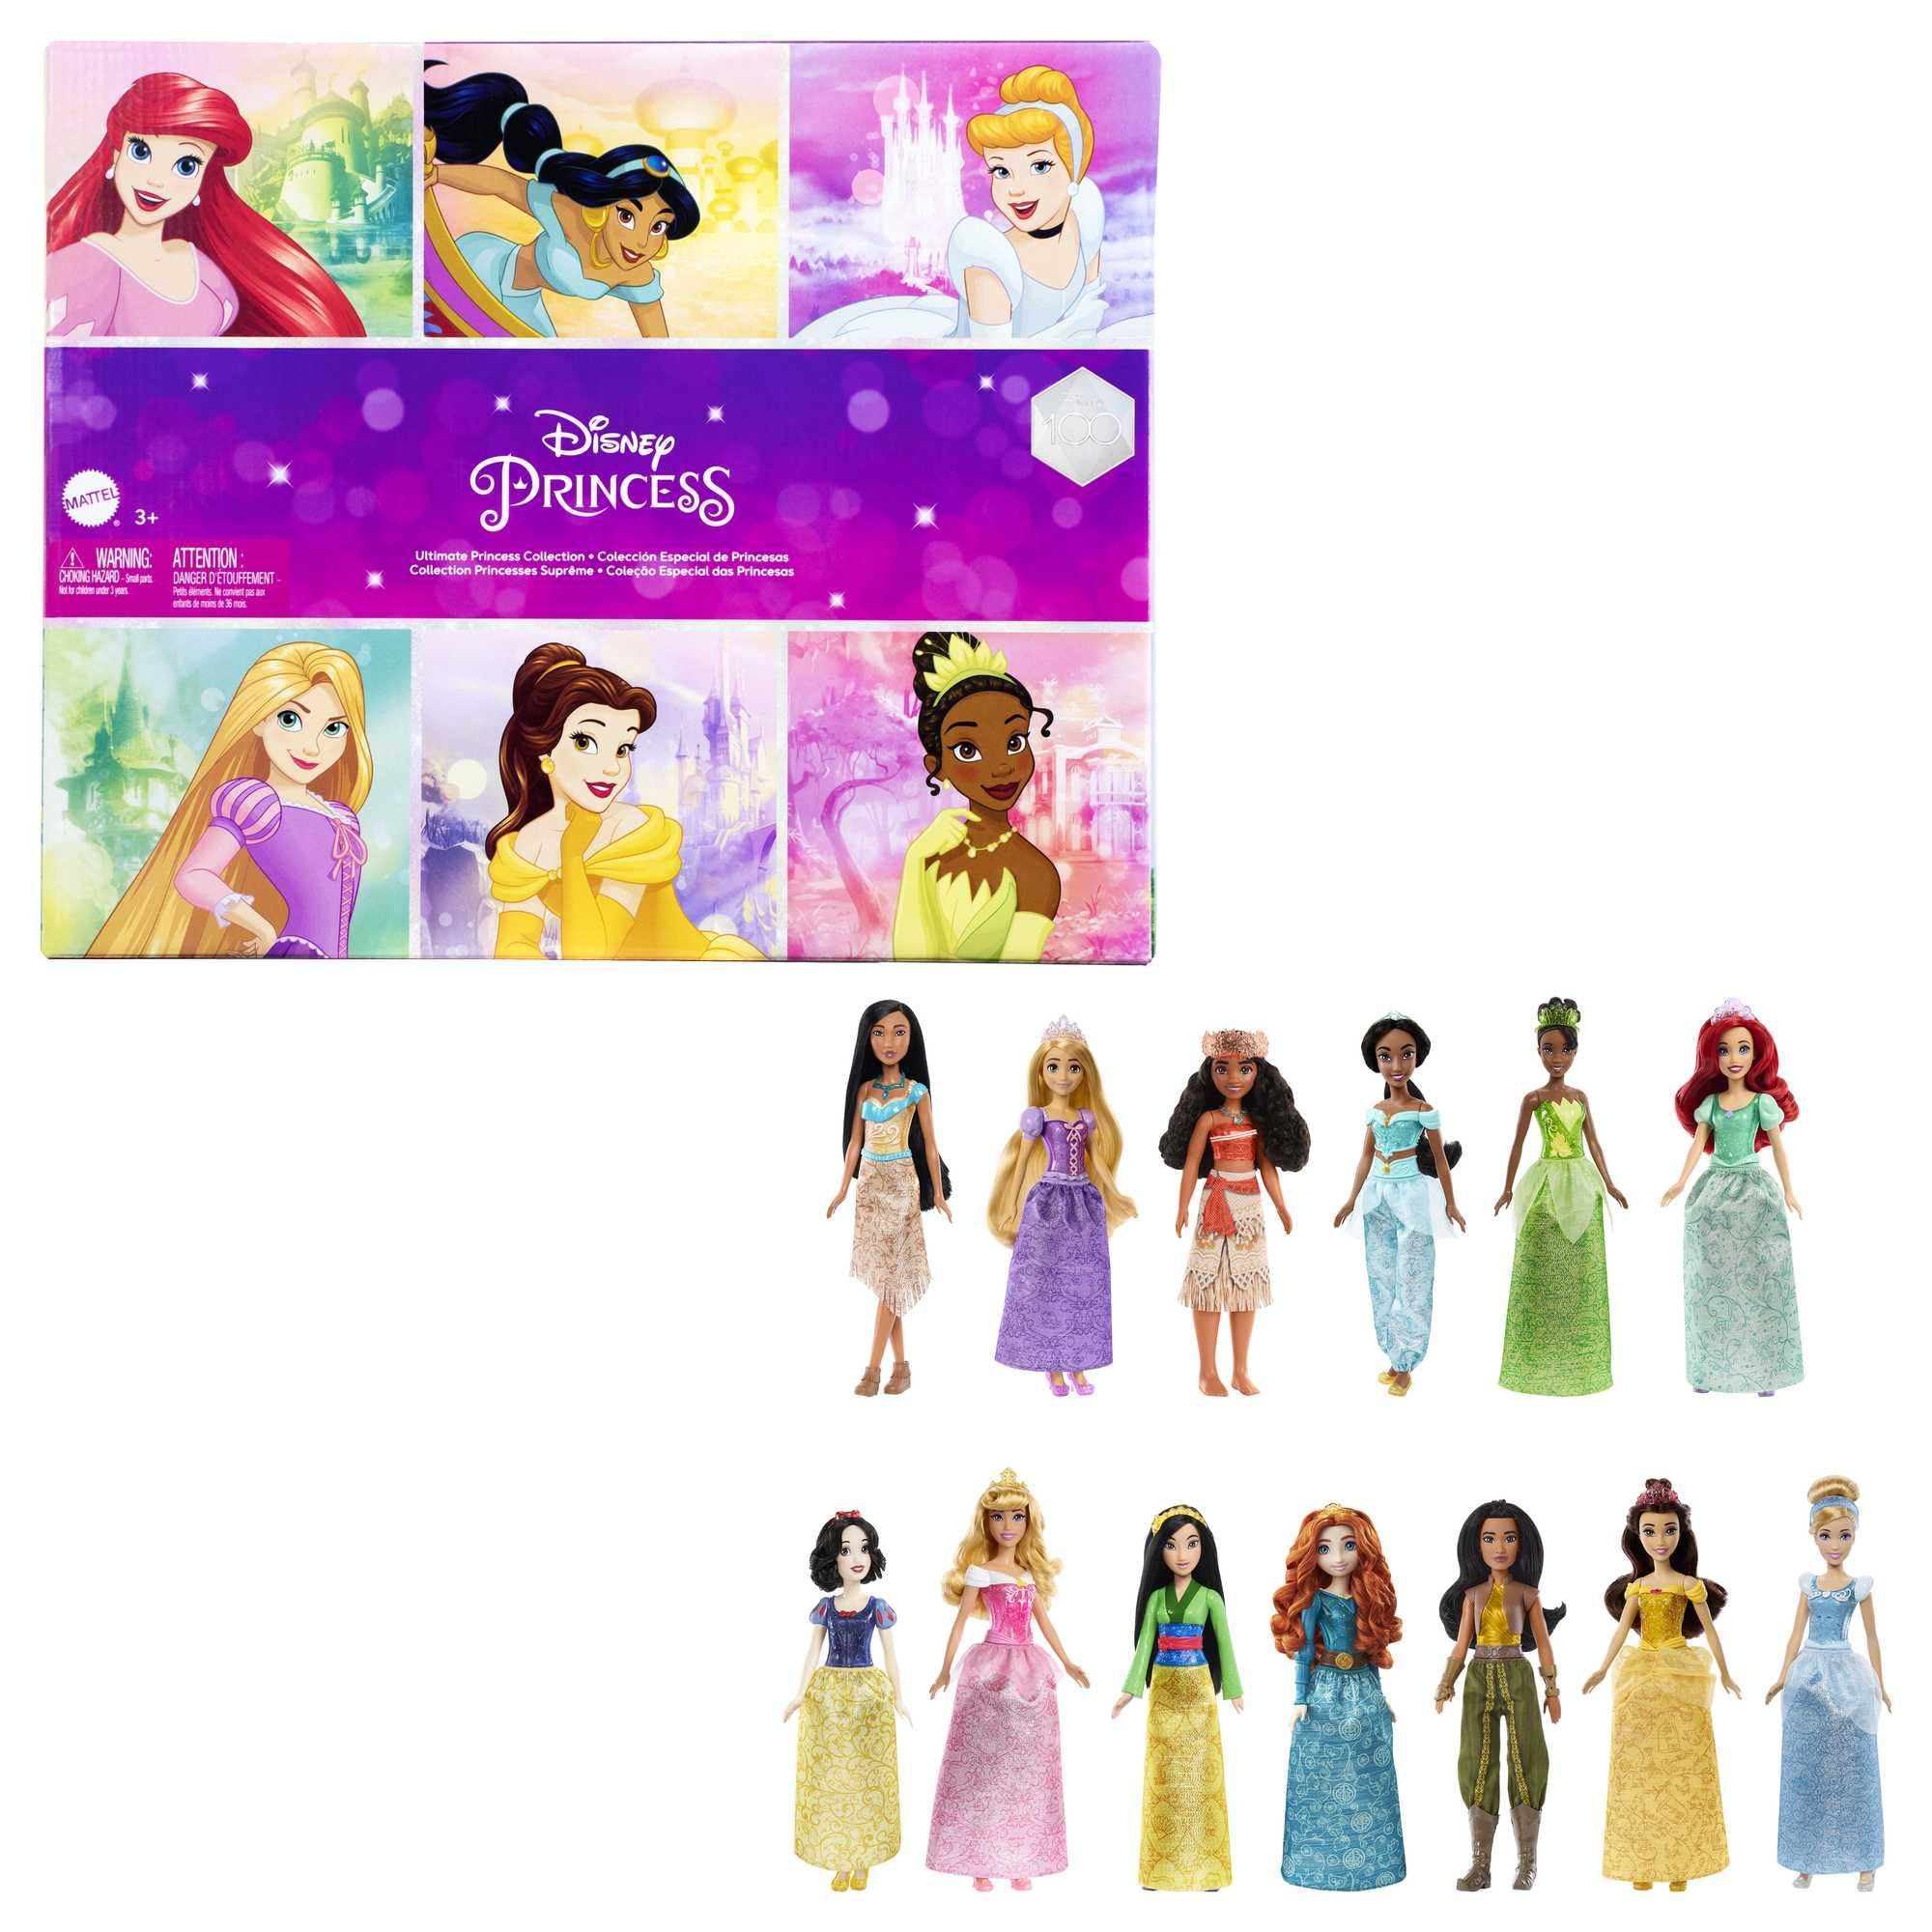 Disney Princess Fashion Doll Gift Set with 13 Dolls in Sparkling Clothing and Accessories, Inspired by Disney Movies (Amazon Exclusive)